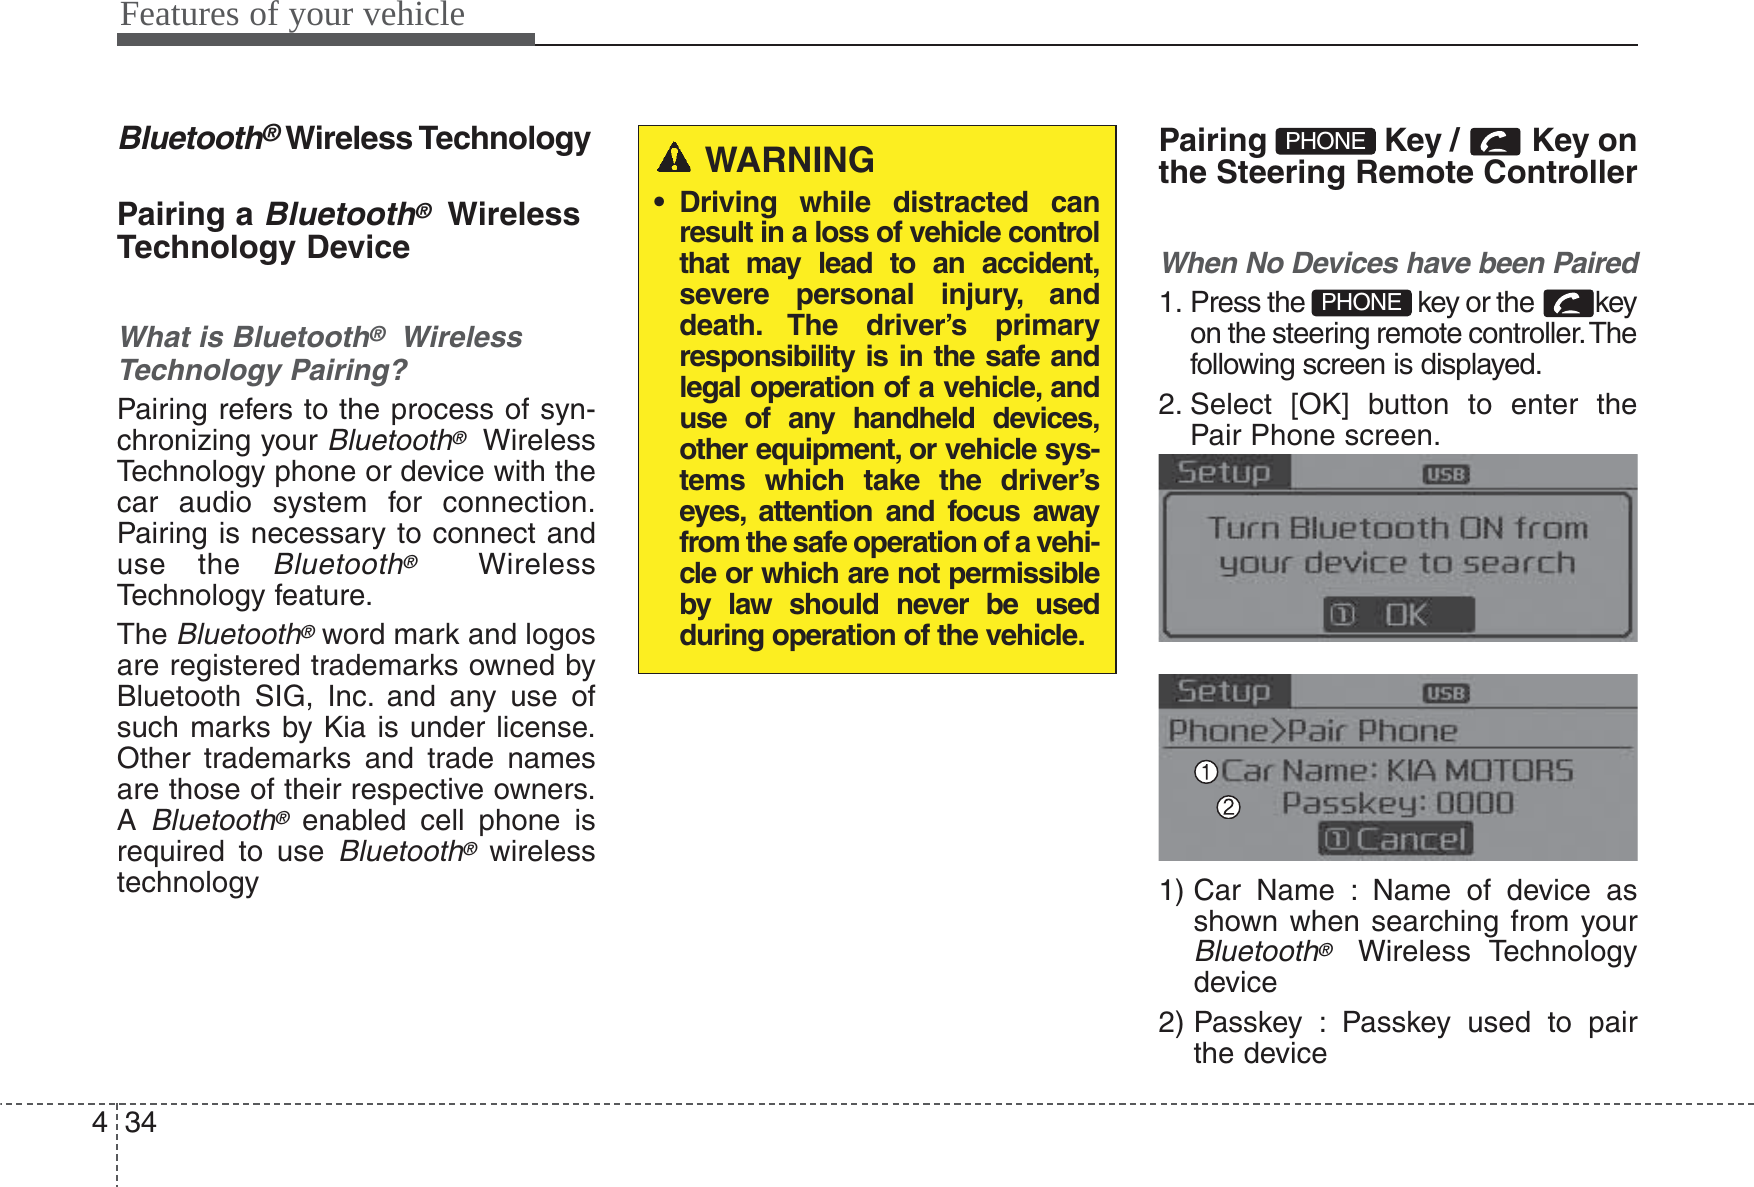 Features of your vehicle344Bluetooth®Wireless TechnologyPairing a Bluetooth®WirelessTechnology DeviceWhat is Bluetooth®WirelessTechnology Pairing?Pairing refers to the process of syn-chronizing your Bluetooth®WirelessTechnology phone or device with thecar audio system for connection.Pairing is necessary to connect anduse the Bluetooth®WirelessTechnology feature.The Bluetooth®word mark and logosare registered trademarks owned byBluetooth SIG, Inc. and any use ofsuch marks by Kia is under license.Other trademarks and trade namesare those of their respective owners.A Bluetooth®enabled cell phone isrequired to use Bluetooth®wirelesstechnologyPairing  Key /  Key onthe Steering Remote ControllerWhen No Devices have been Paired1. Press the  key or the  keyon the steering remote controller. Thefollowing screen is displayed.2. Select [OK] button to enter thePair Phone screen.1) Car Name : Name of device asshown when searching from yourBluetooth®Wireless Technologydevice2) Passkey : Passkey used to pairthe devicePHONEPHONEWARNING• Driving while distracted canresult in a loss of vehicle controlthat may lead to an accident,severe personal injury, anddeath. The driver’s primaryresponsibility is in the safe andlegal operation of a vehicle, anduse of any handheld devices,other equipment, or vehicle sys-tems which take the driver’seyes, attention and focus awayfrom the safe operation of a vehi-cle or which are not permissibleby law should never be usedduring operation of the vehicle.